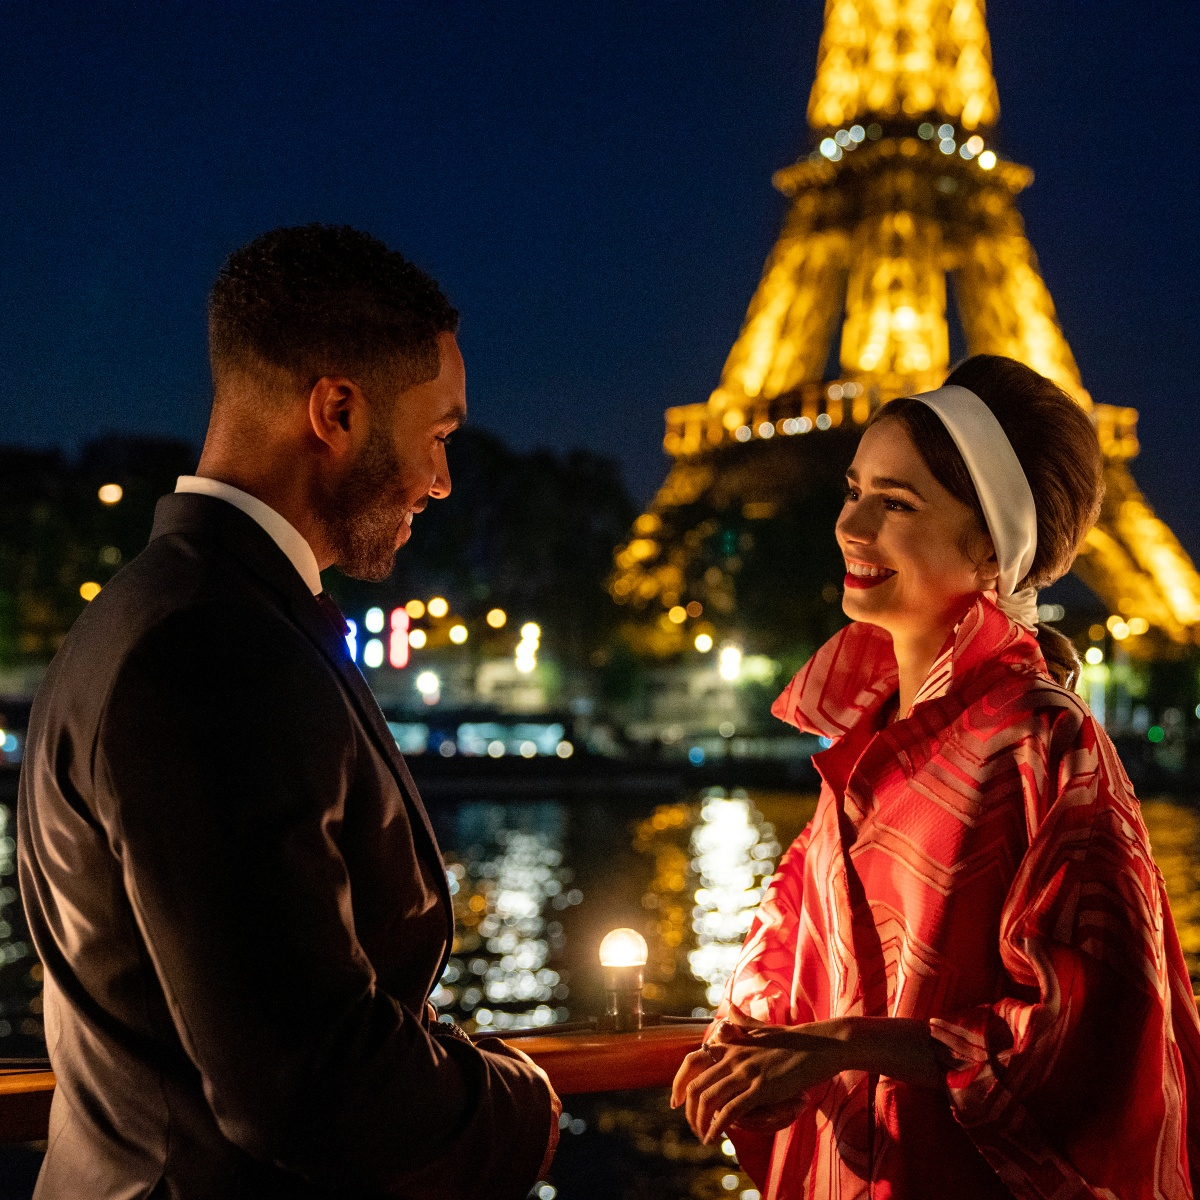 Emily in Paris season 2 episode 1 cast: Who is joining the cast